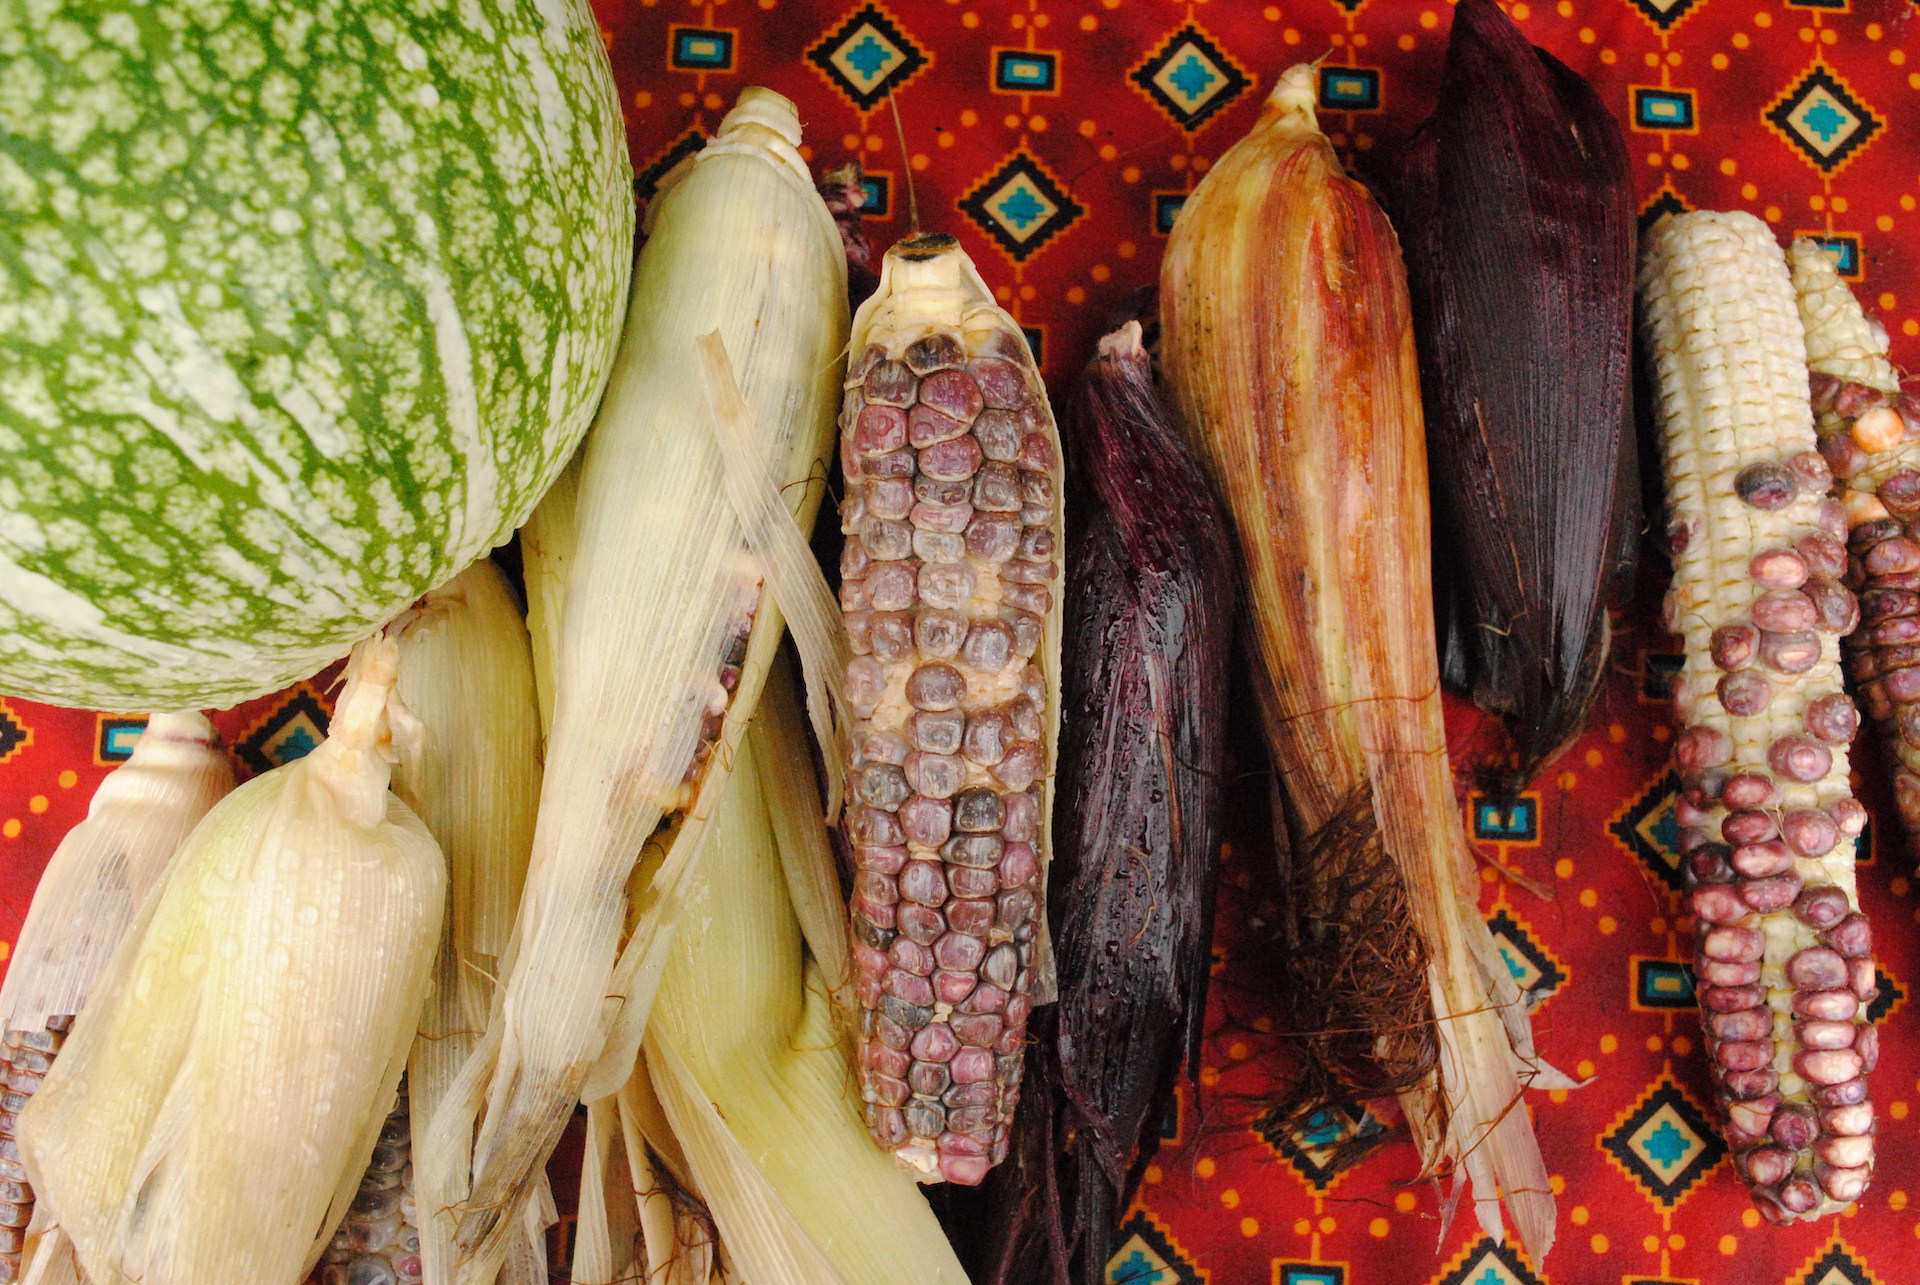 An array of corns in different colors